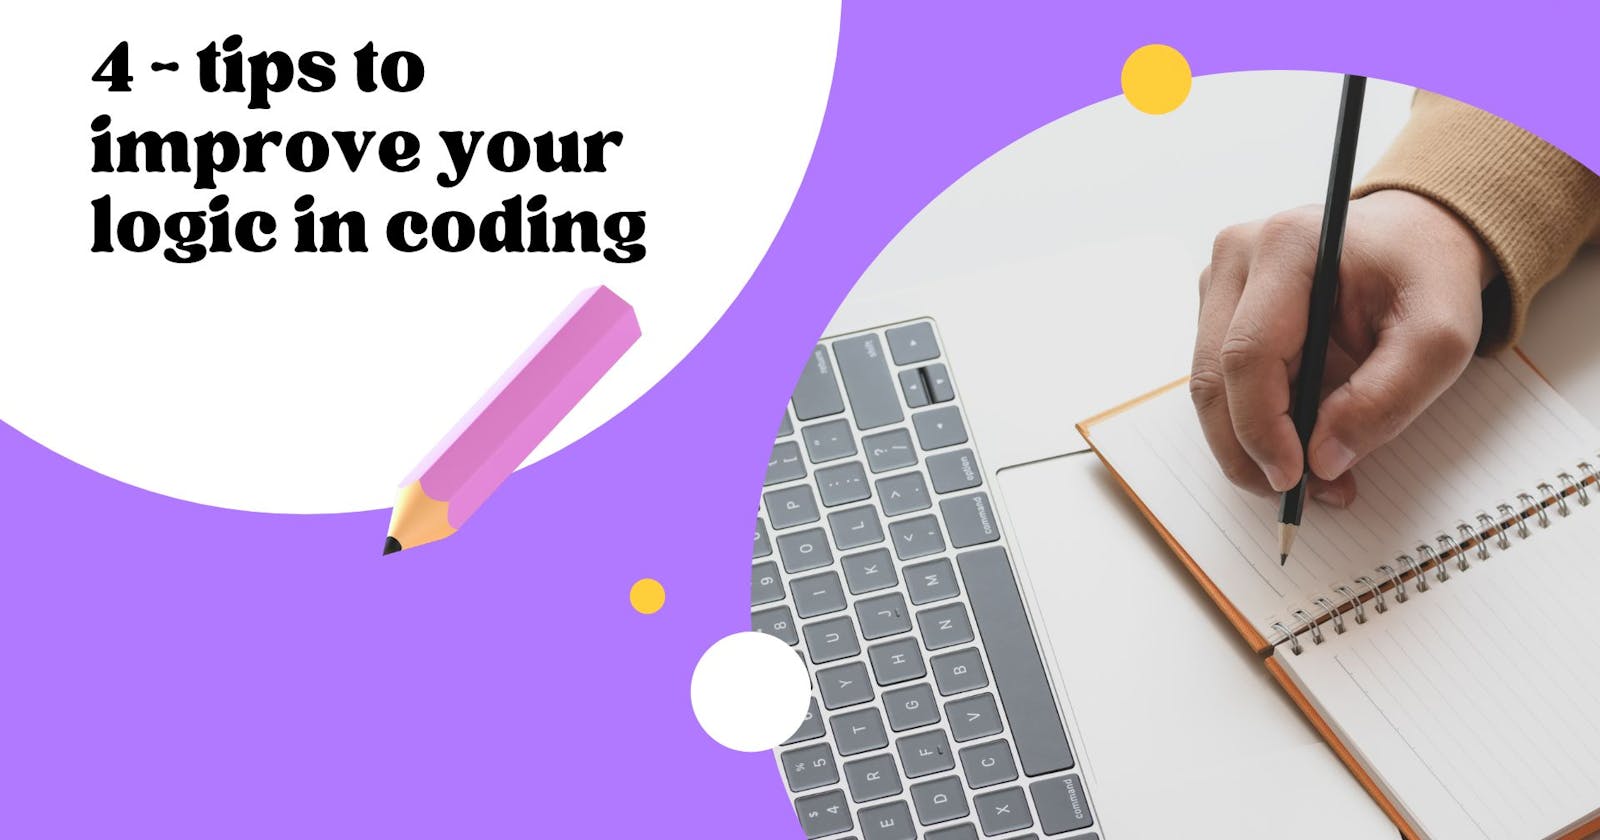 4 tips to improve your logic in coding